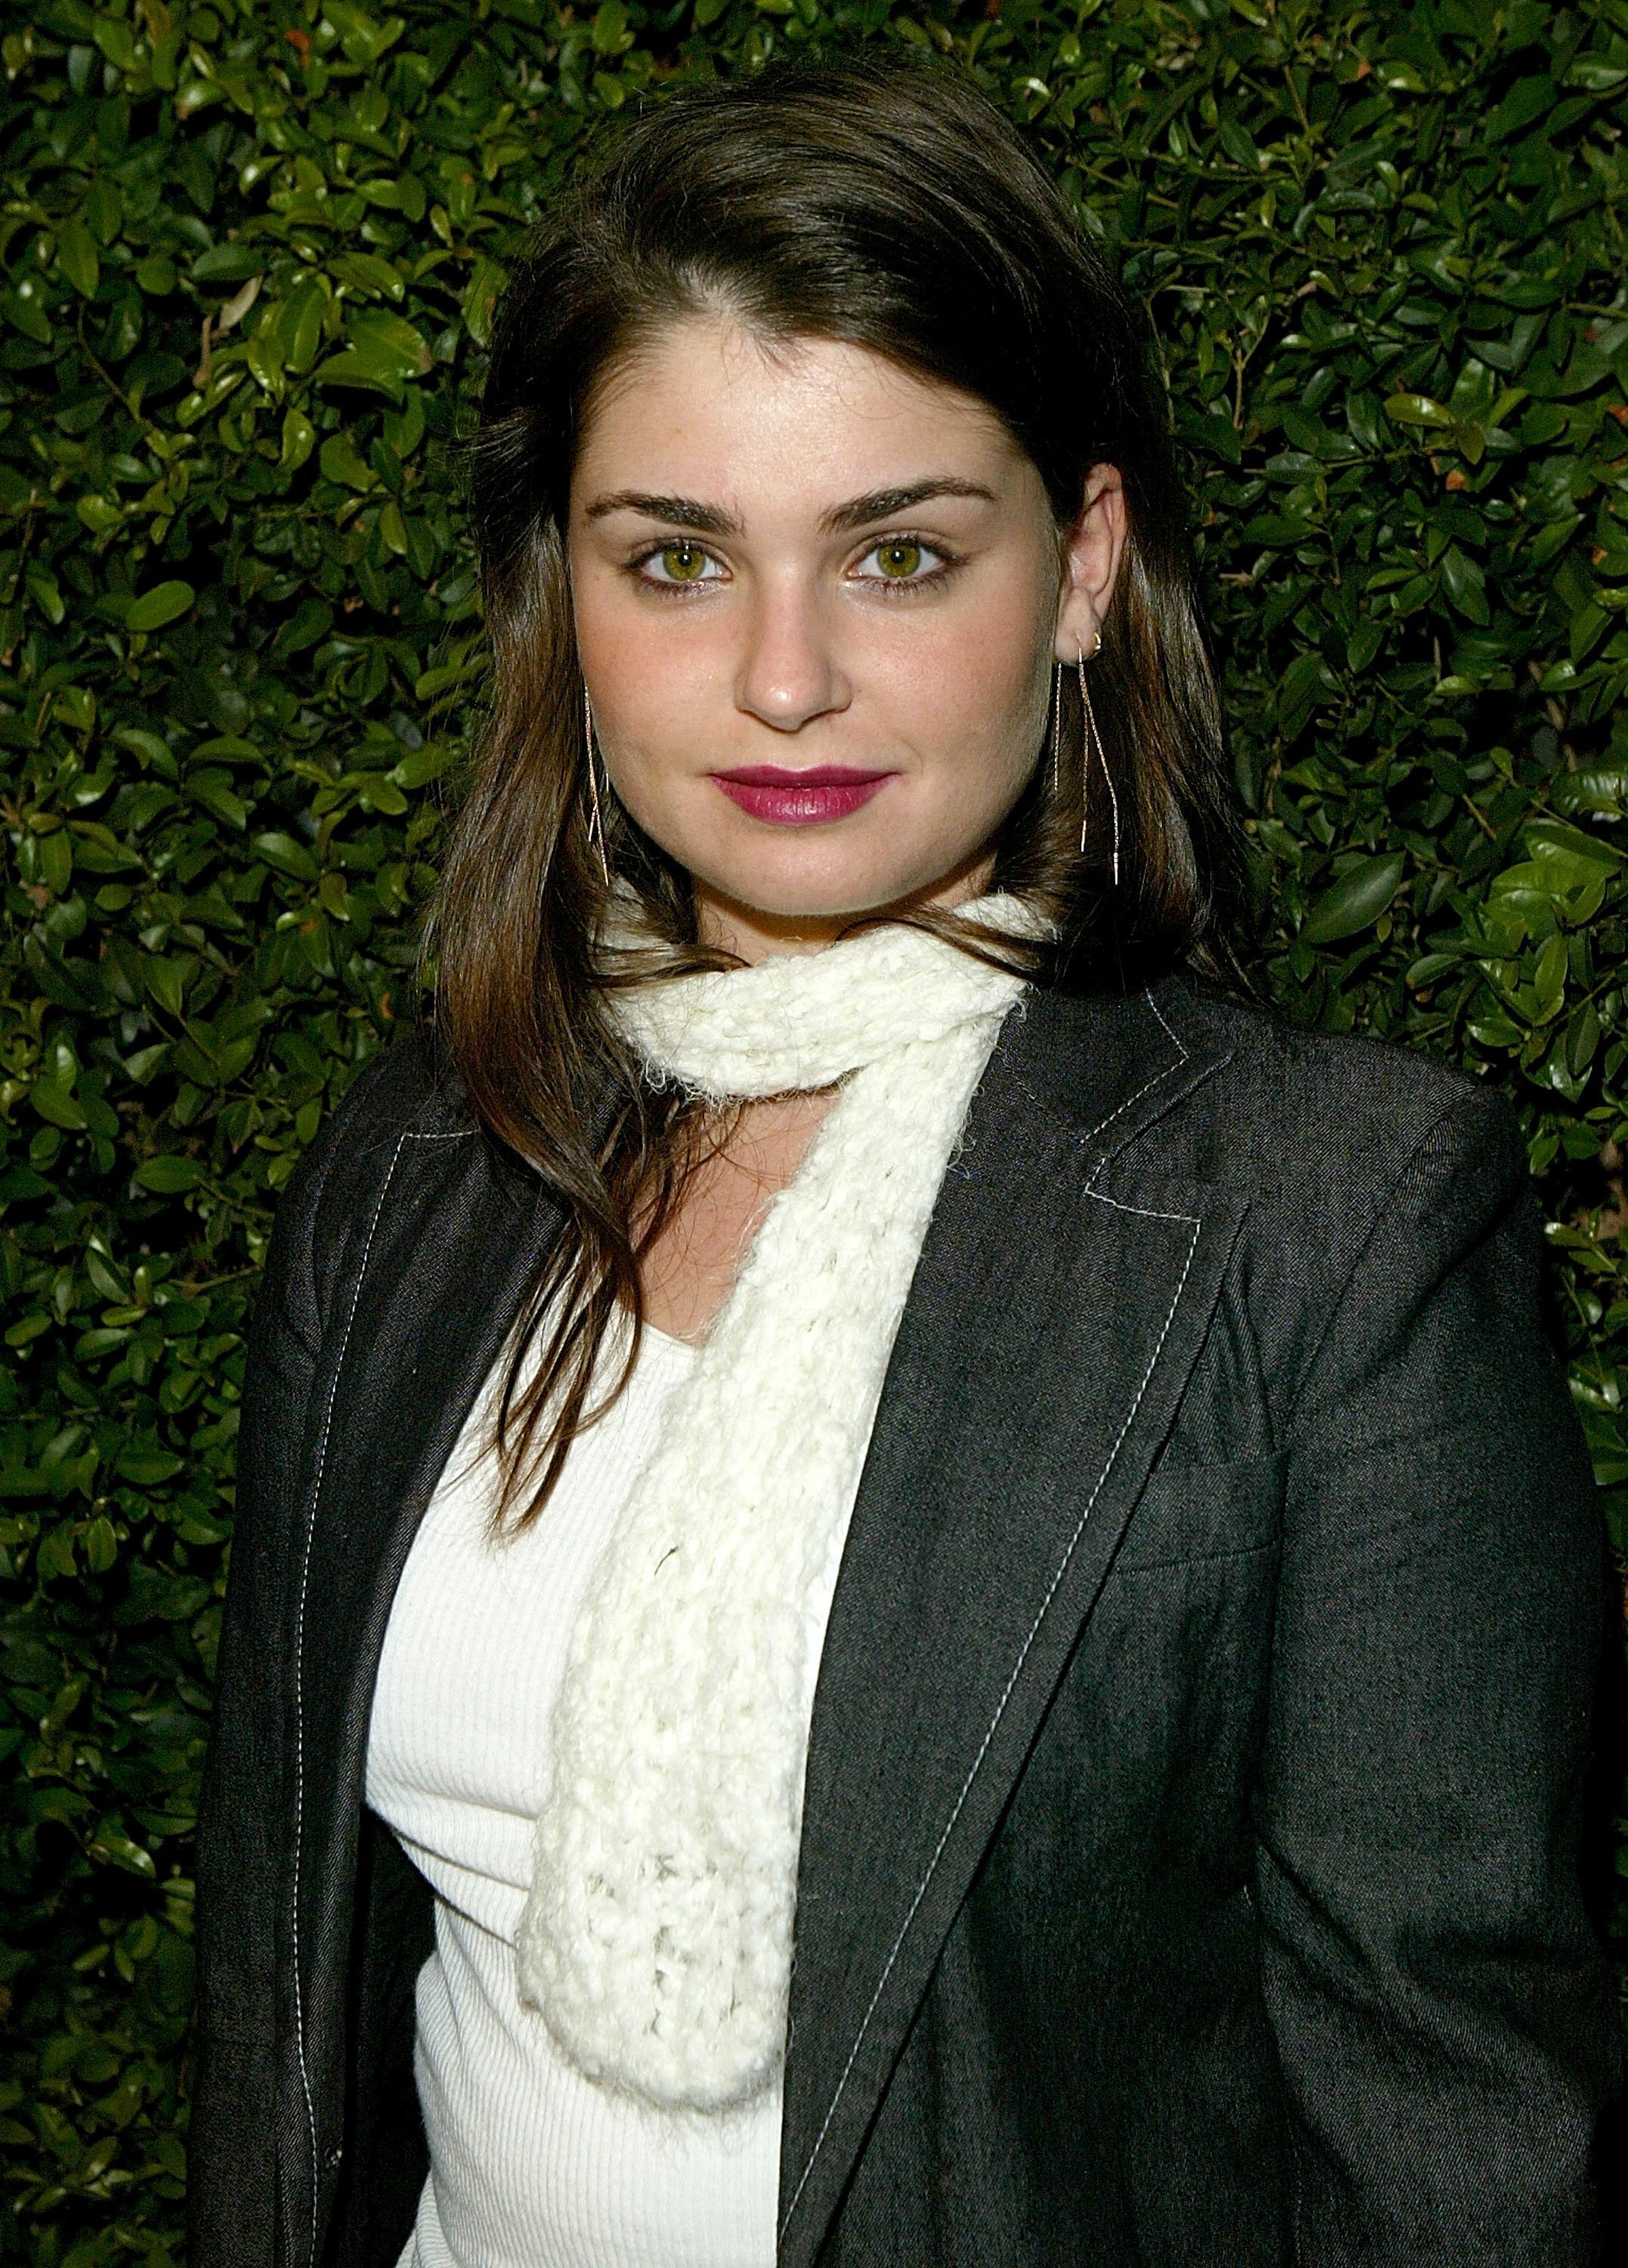  Aimee Osbourne during the opening of the Stella McCartney store in 2003. | Source: Getty Images